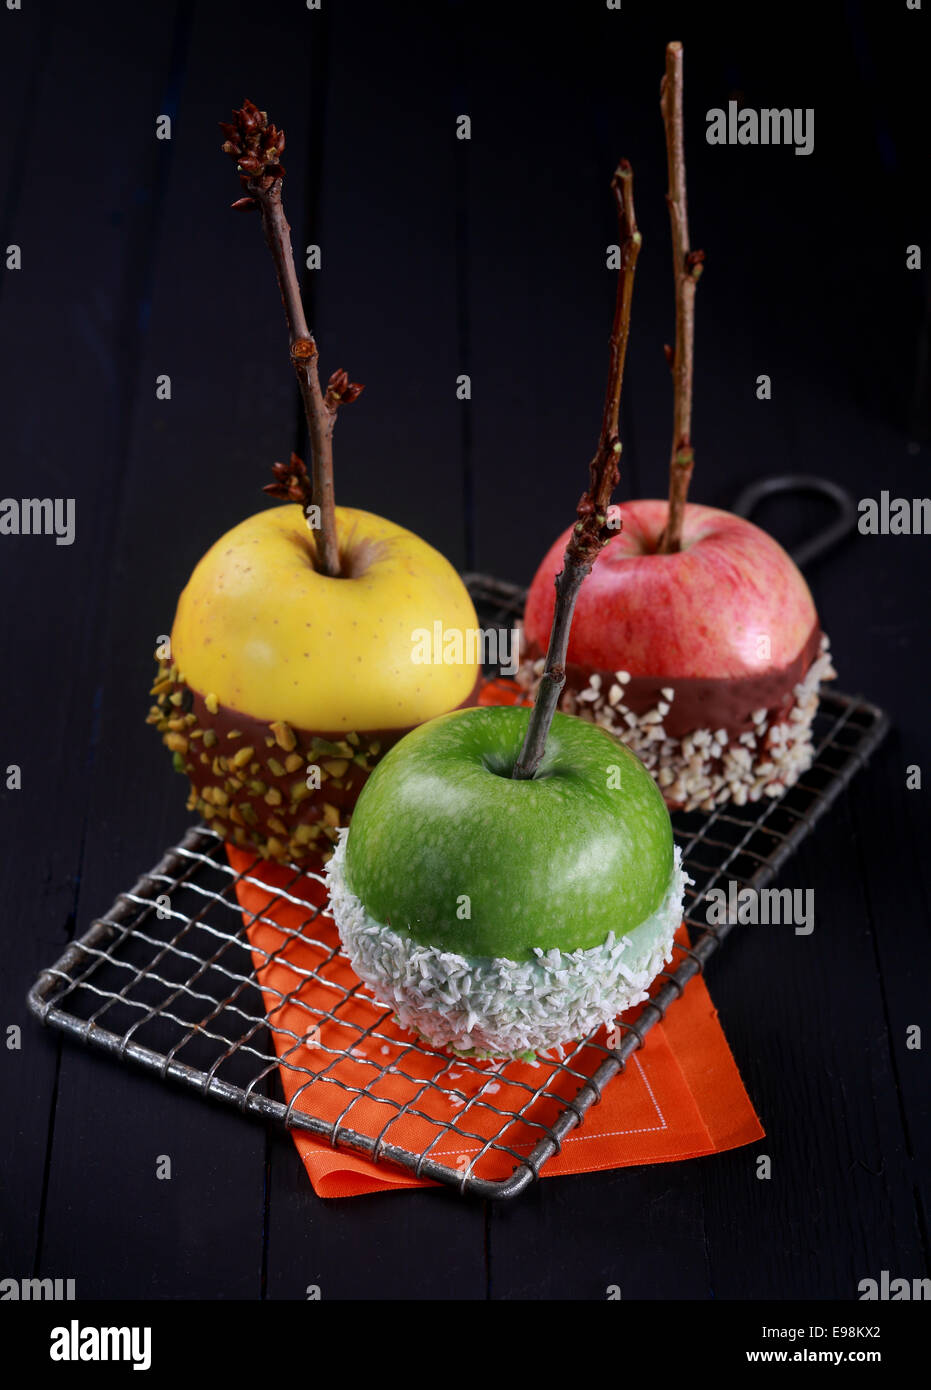 Three green, yellow and red candy coated apples dipped in chocolate, nuts and sprinkles for Halloween trick-or-treating treats standing cooling on a wire rack over a dark background Stock Photo